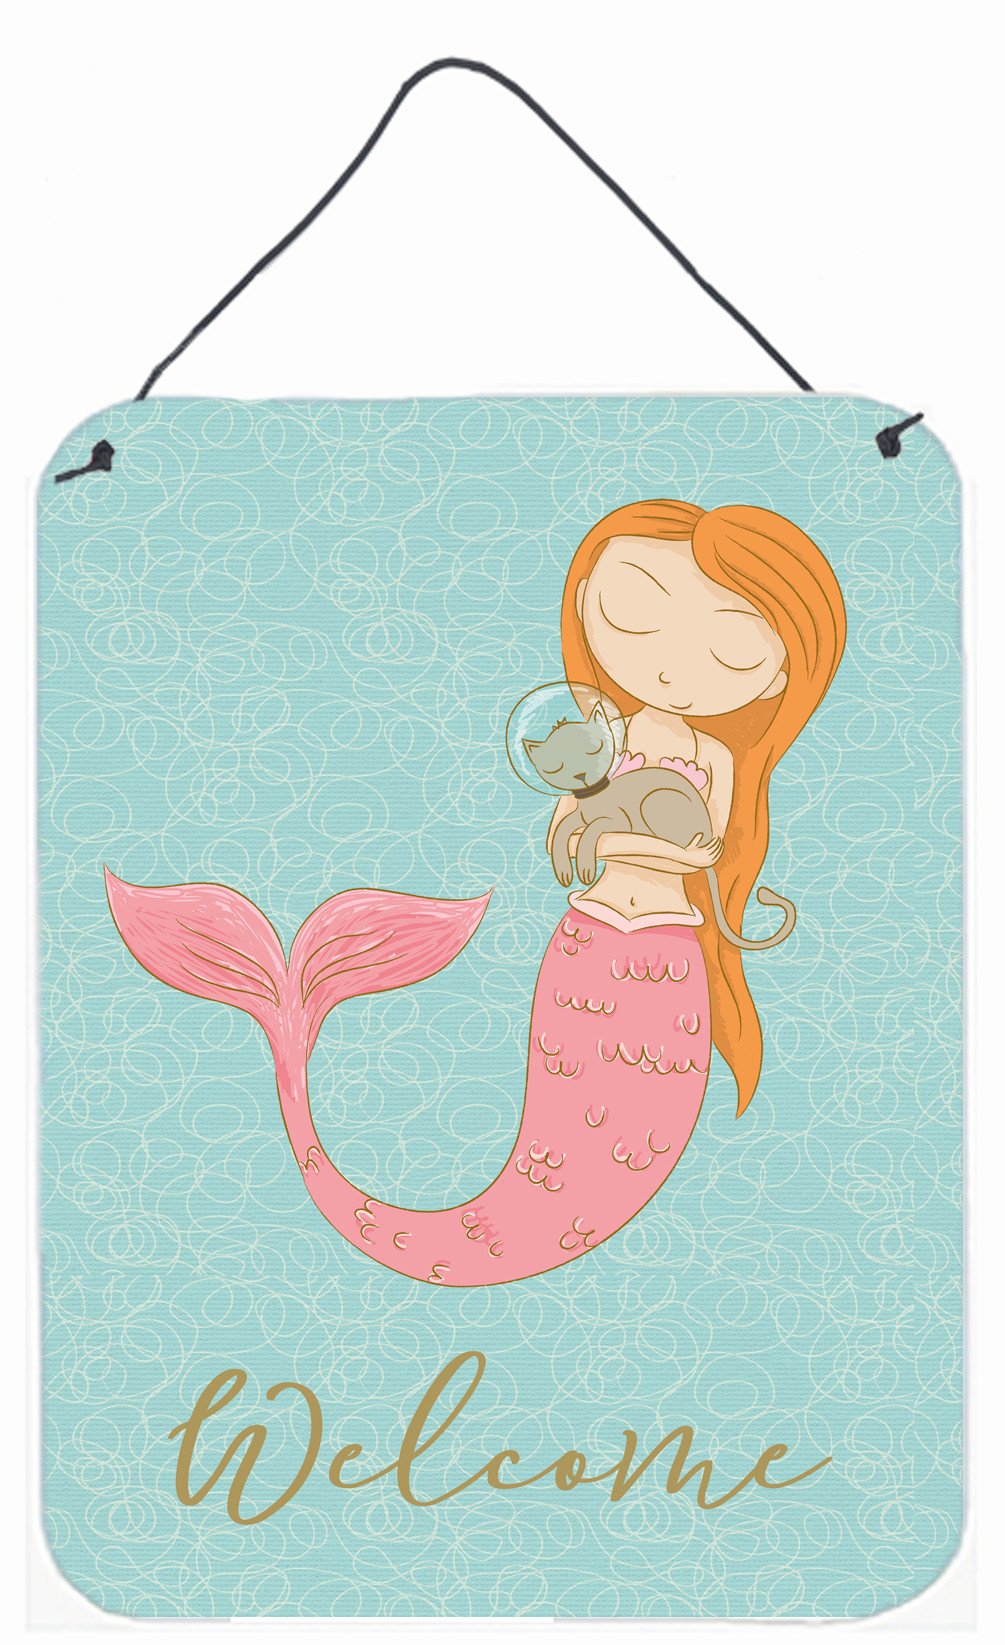 Mermaid with Cat Welcome Wall or Door Hanging Prints BB8577DS1216 by Caroline's Treasures